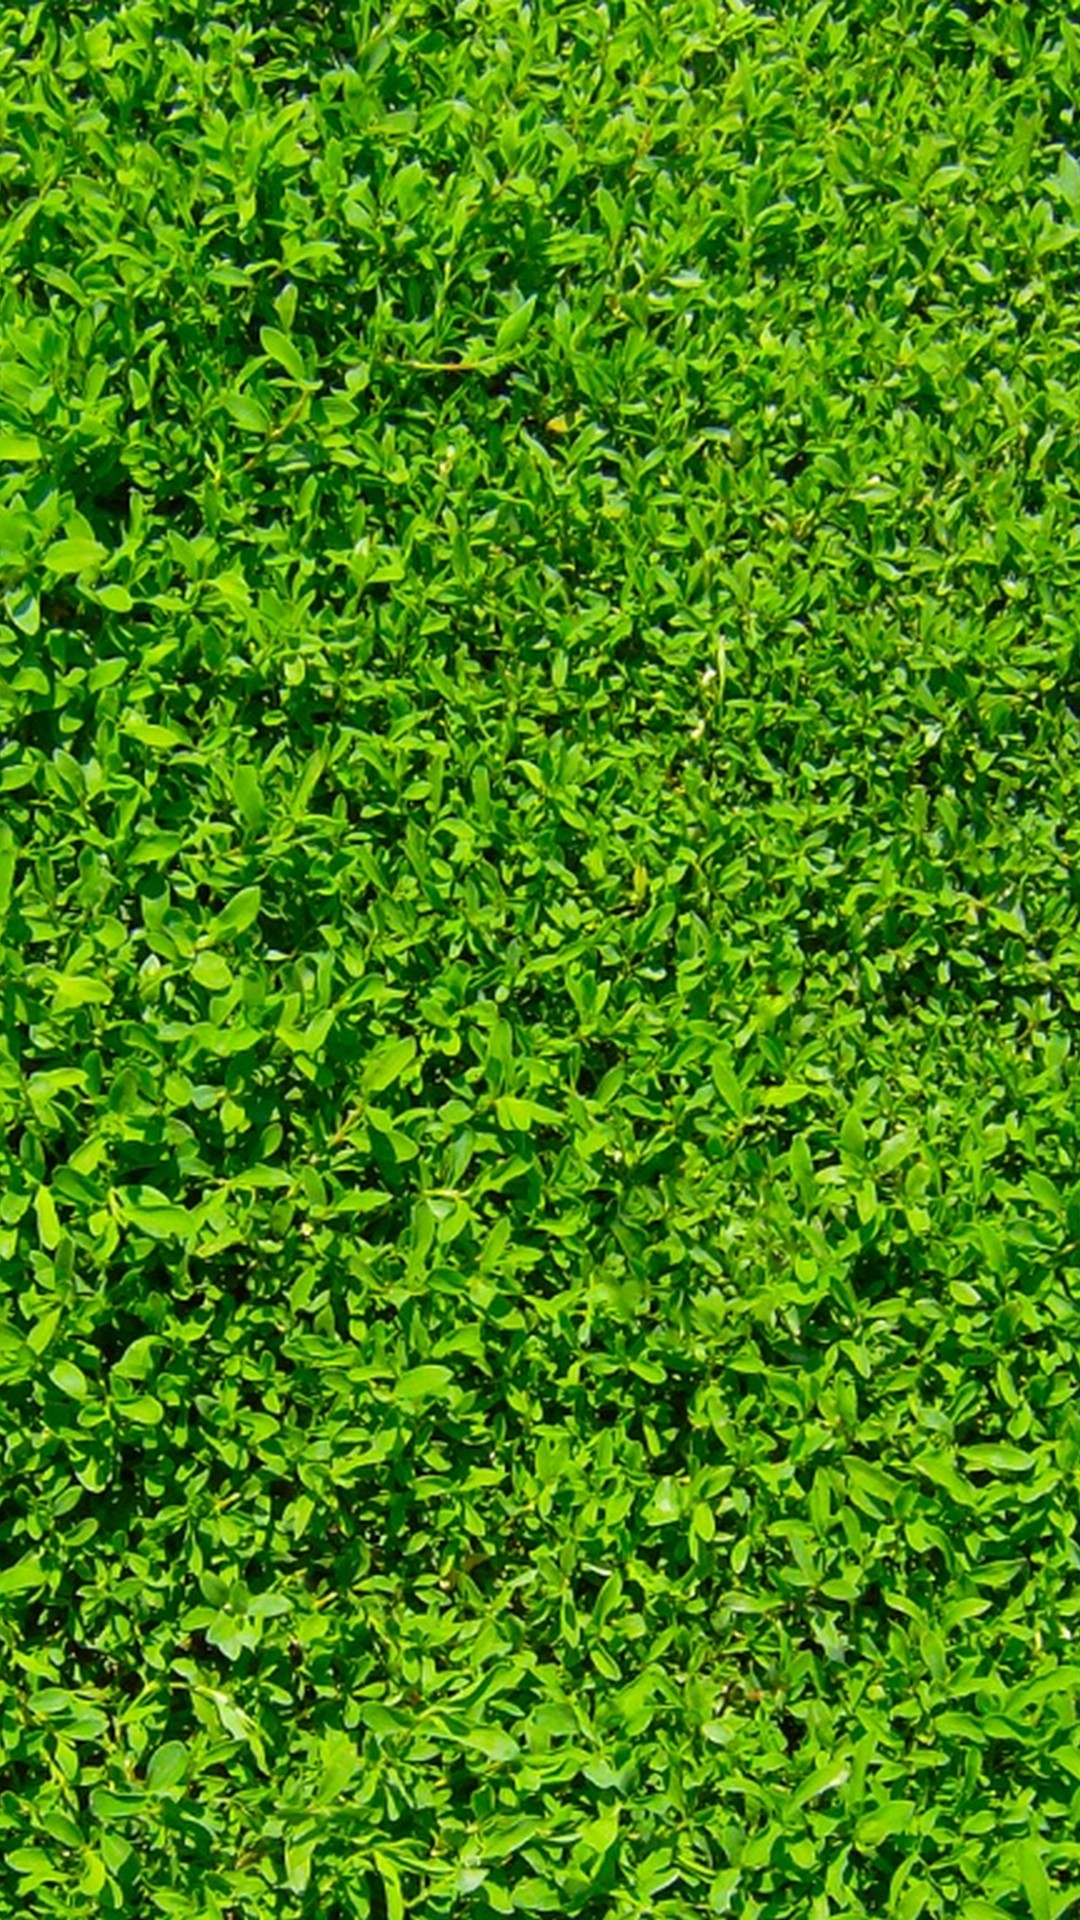 iPhone Wallpaper Nature Green with resolution 1080X1920 pixel. You can make this wallpaper for your iPhone 5, 6, 7, 8, X backgrounds, Mobile Screensaver, or iPad Lock Screen